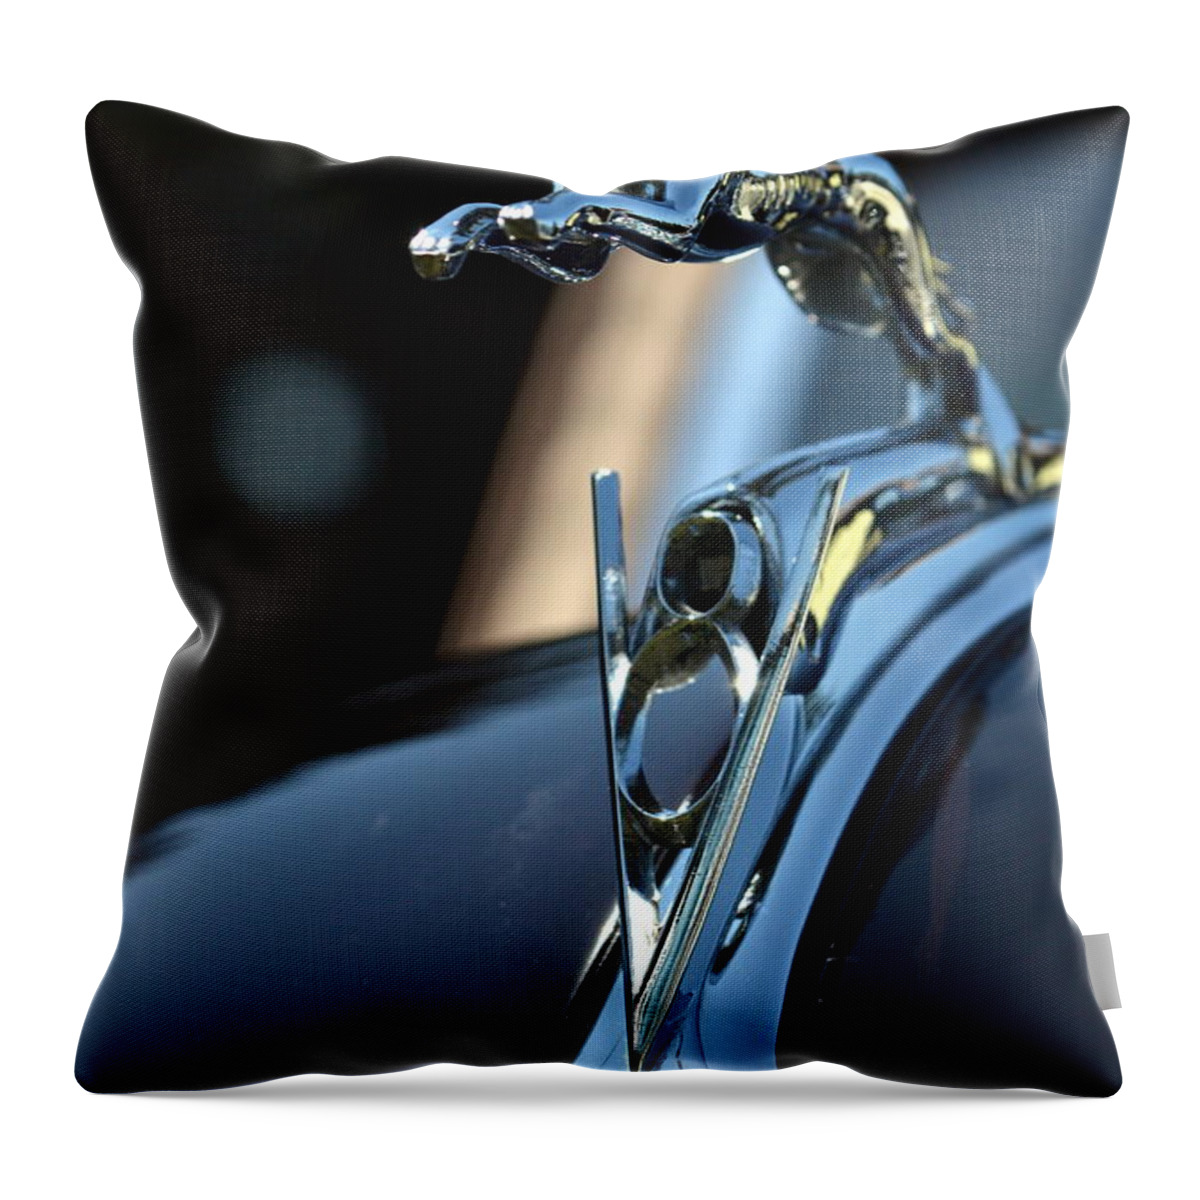 Car Throw Pillow featuring the photograph Ford V-8 Hood Ornament by Dean Ferreira